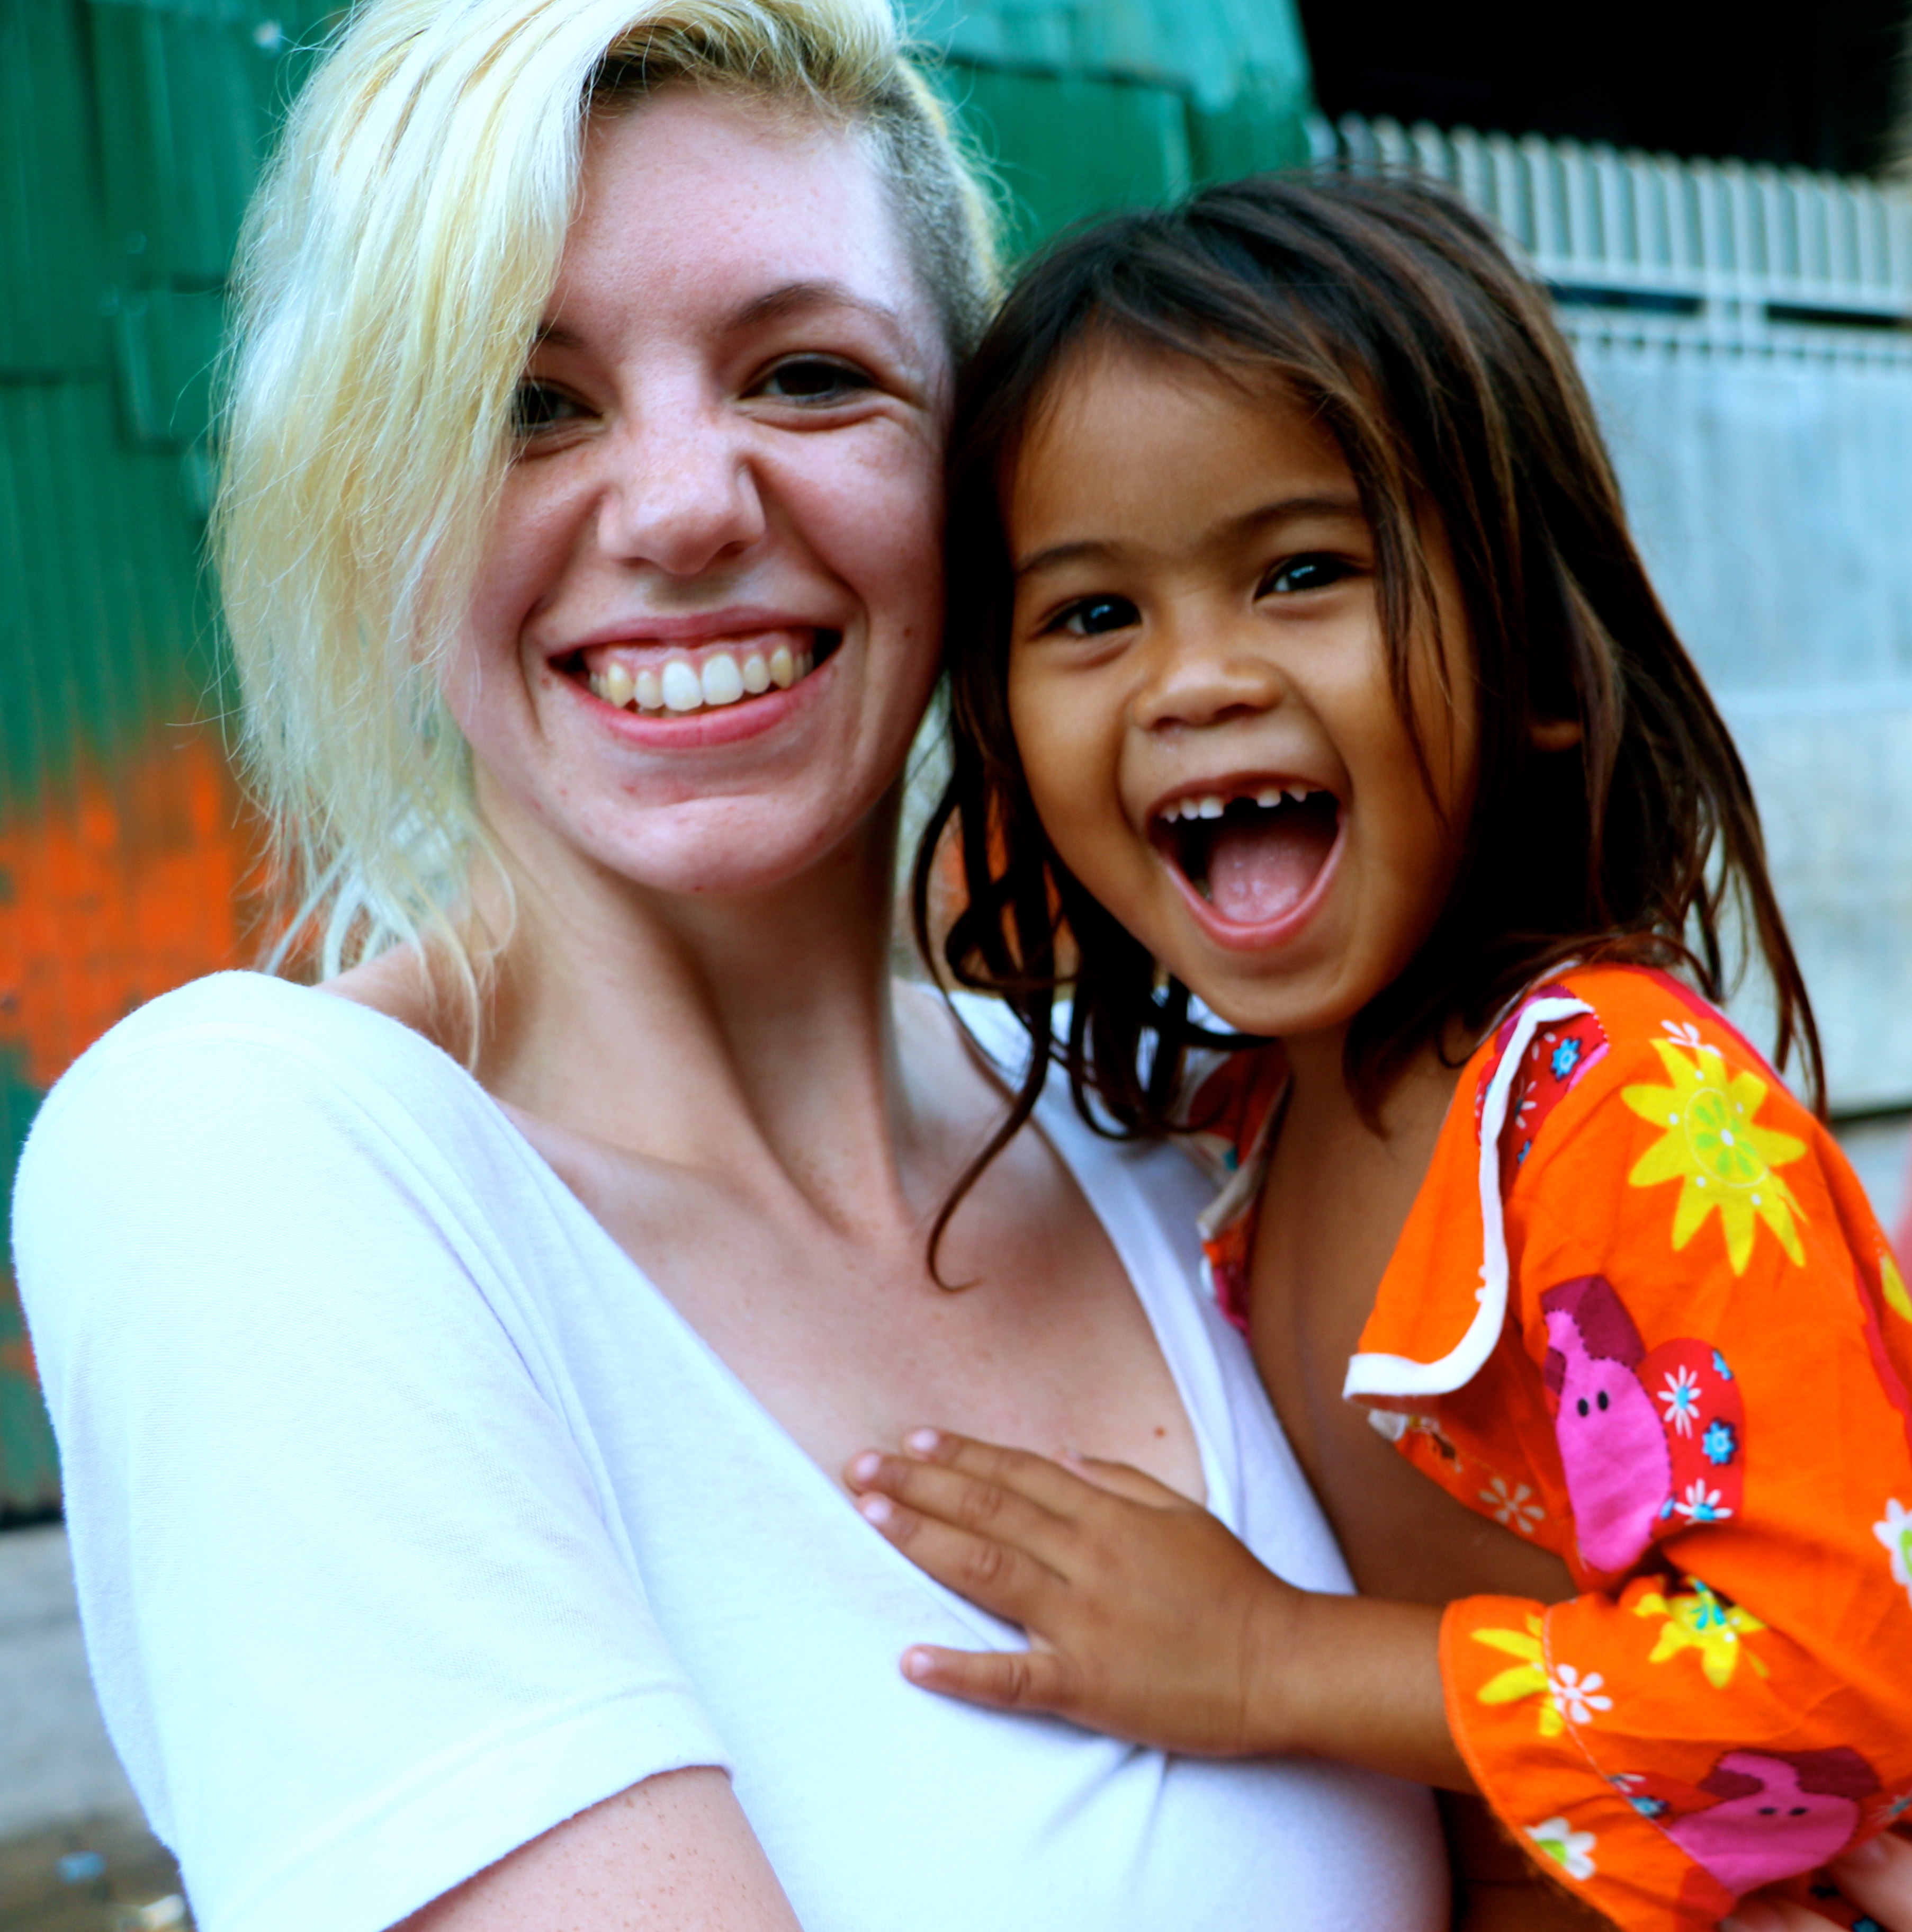 Casie Germonto, a member of our missions trip, and a friend.